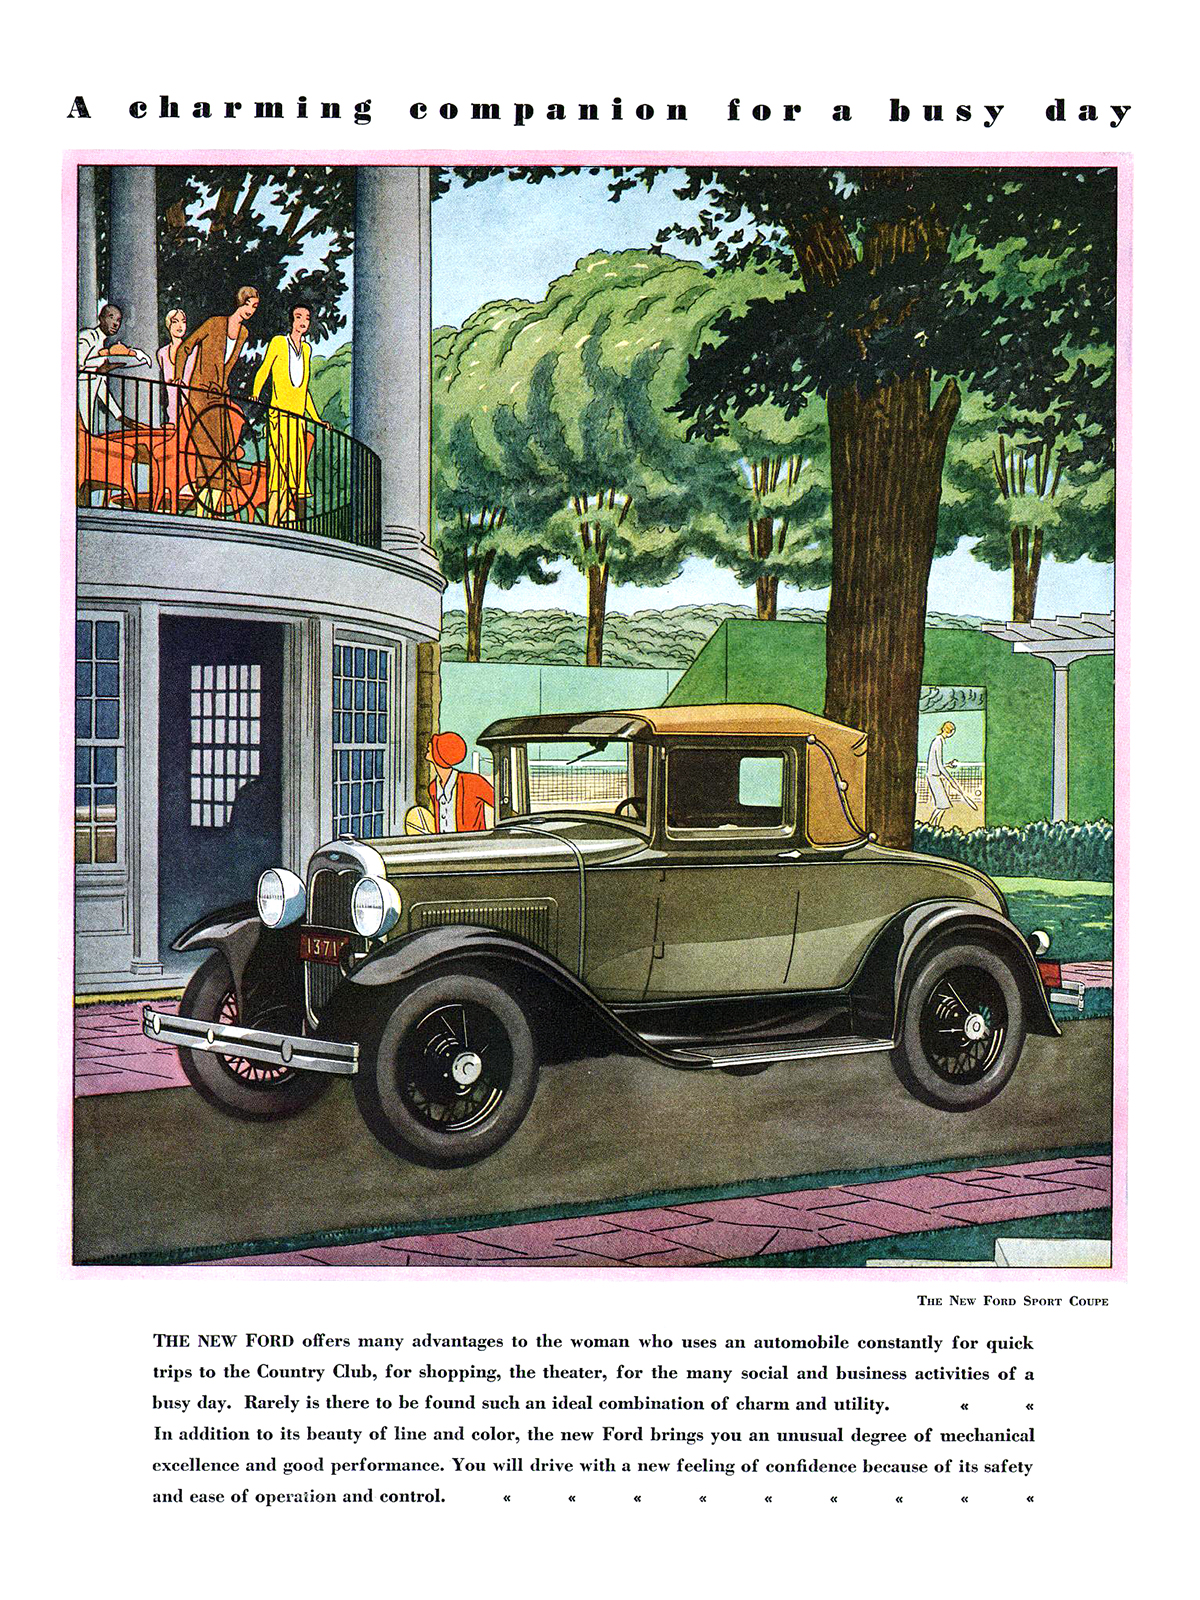 Ford Model A Sport Coupe Ad (May/June, 1930): A charming companion for a busy day